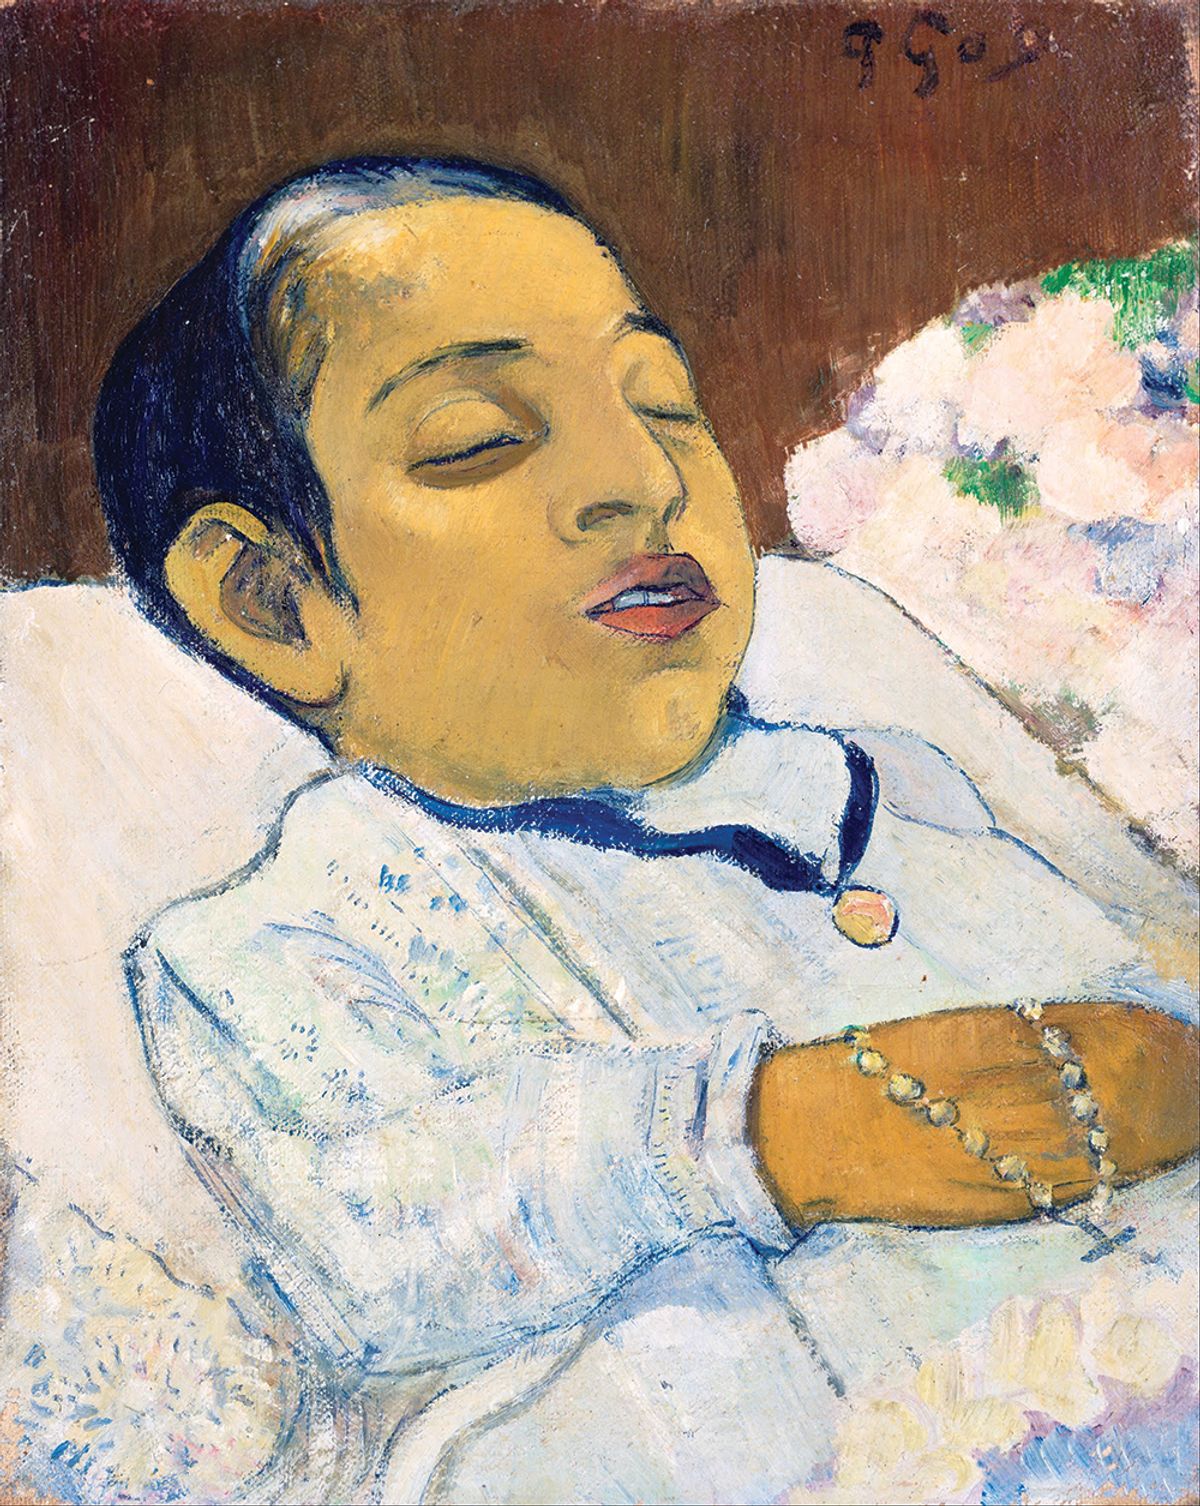 Paul Gauguin’s 1892 deathbed portrait of Atiti currently on loan at the National Gallery, London Kröller-Müller Museum.